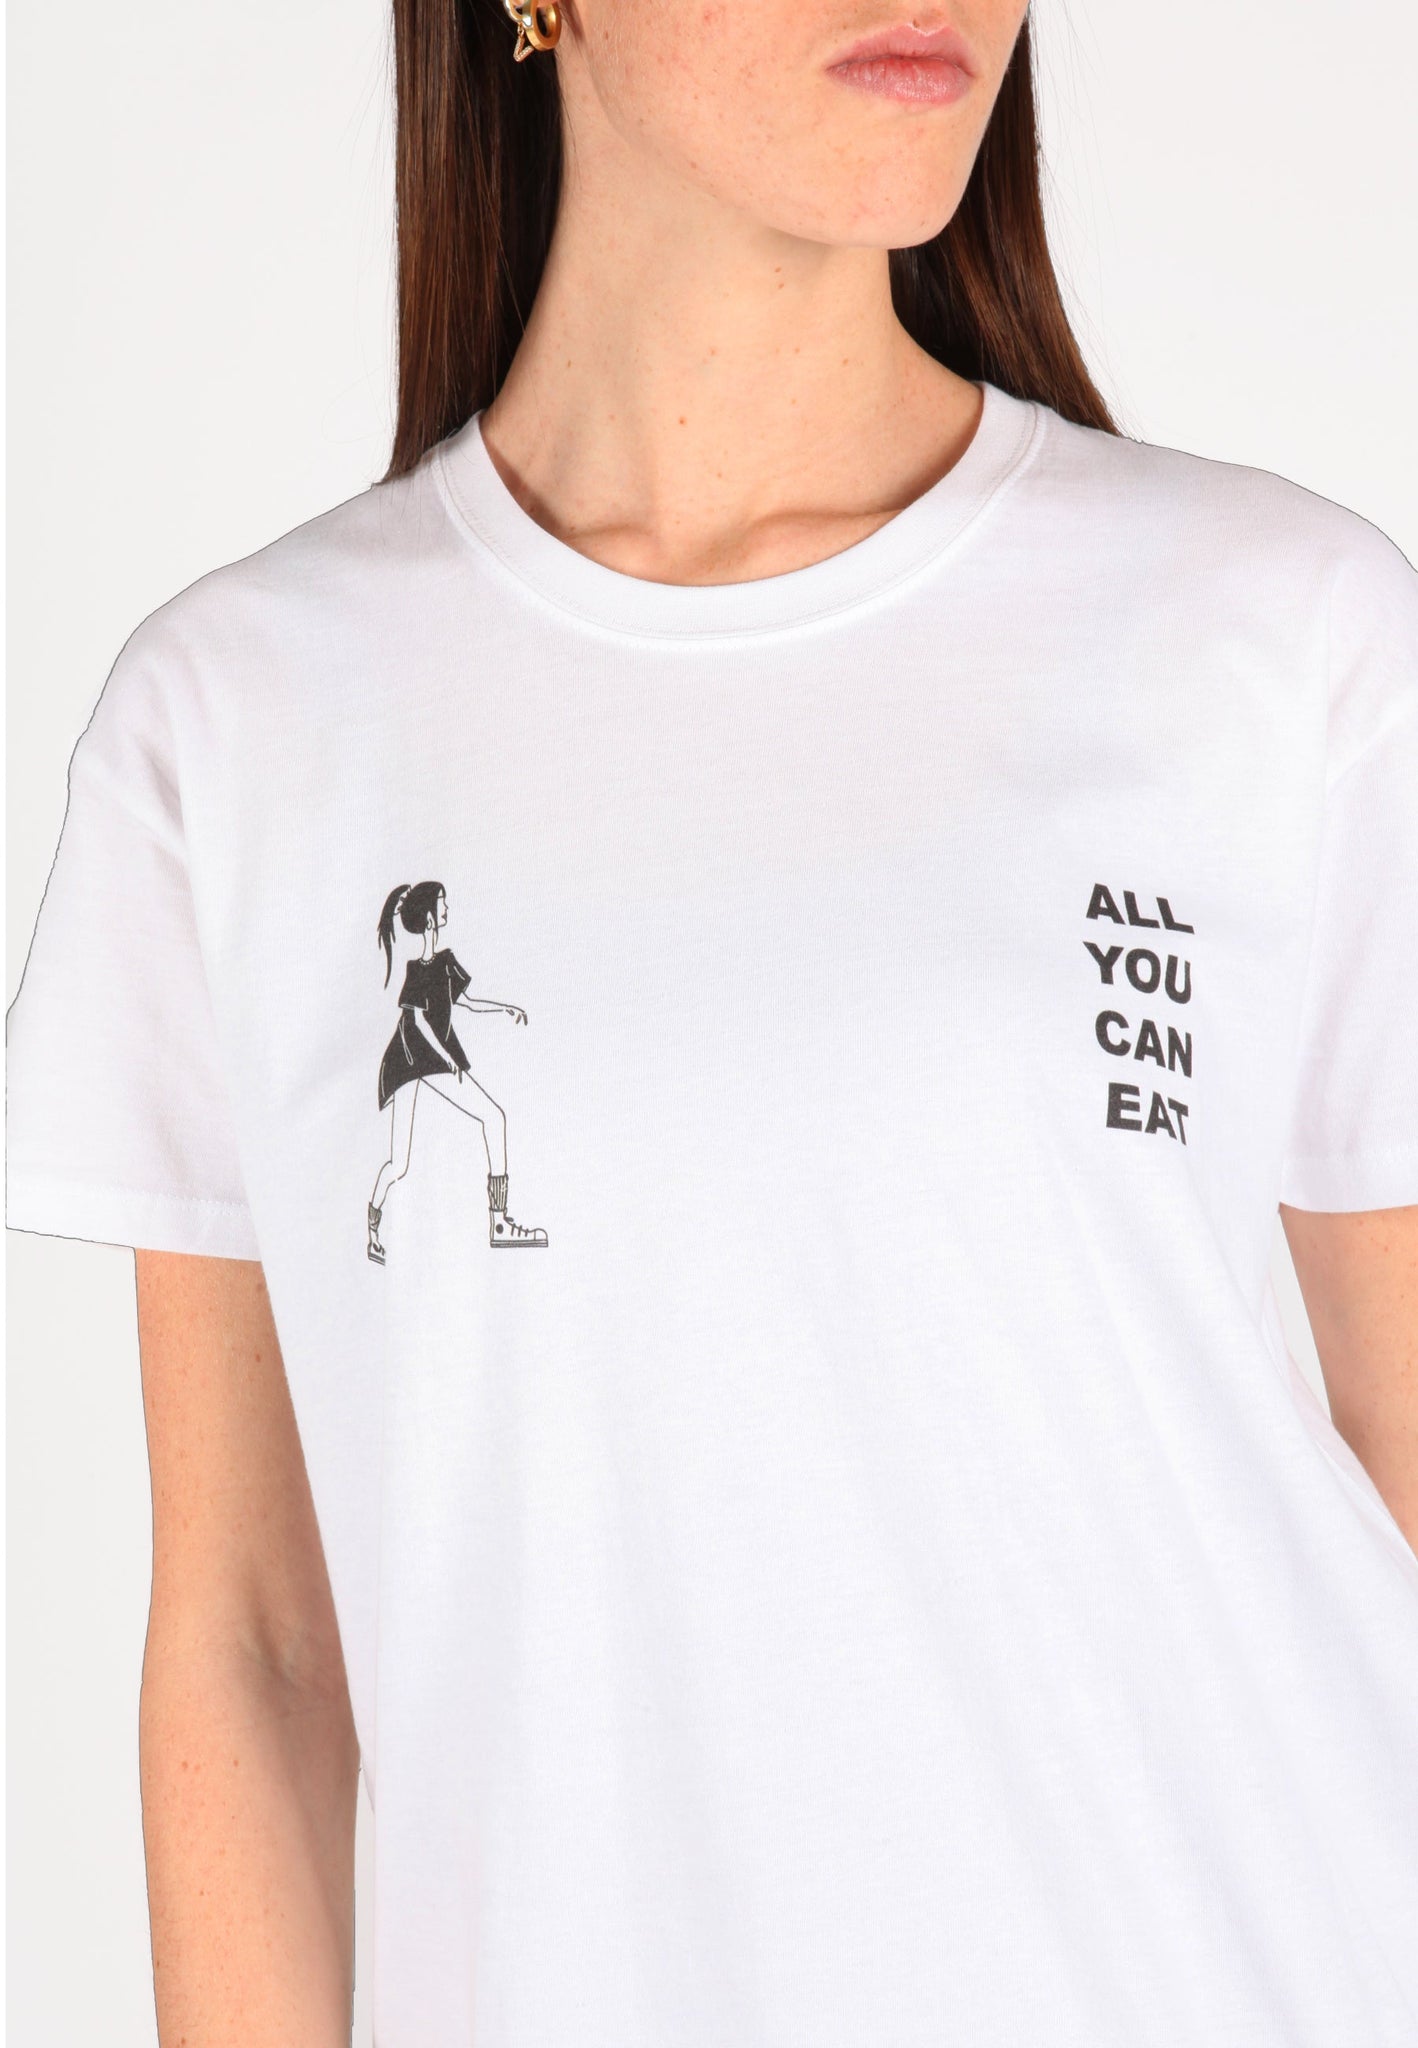 T-Shirt  "All you can eat "